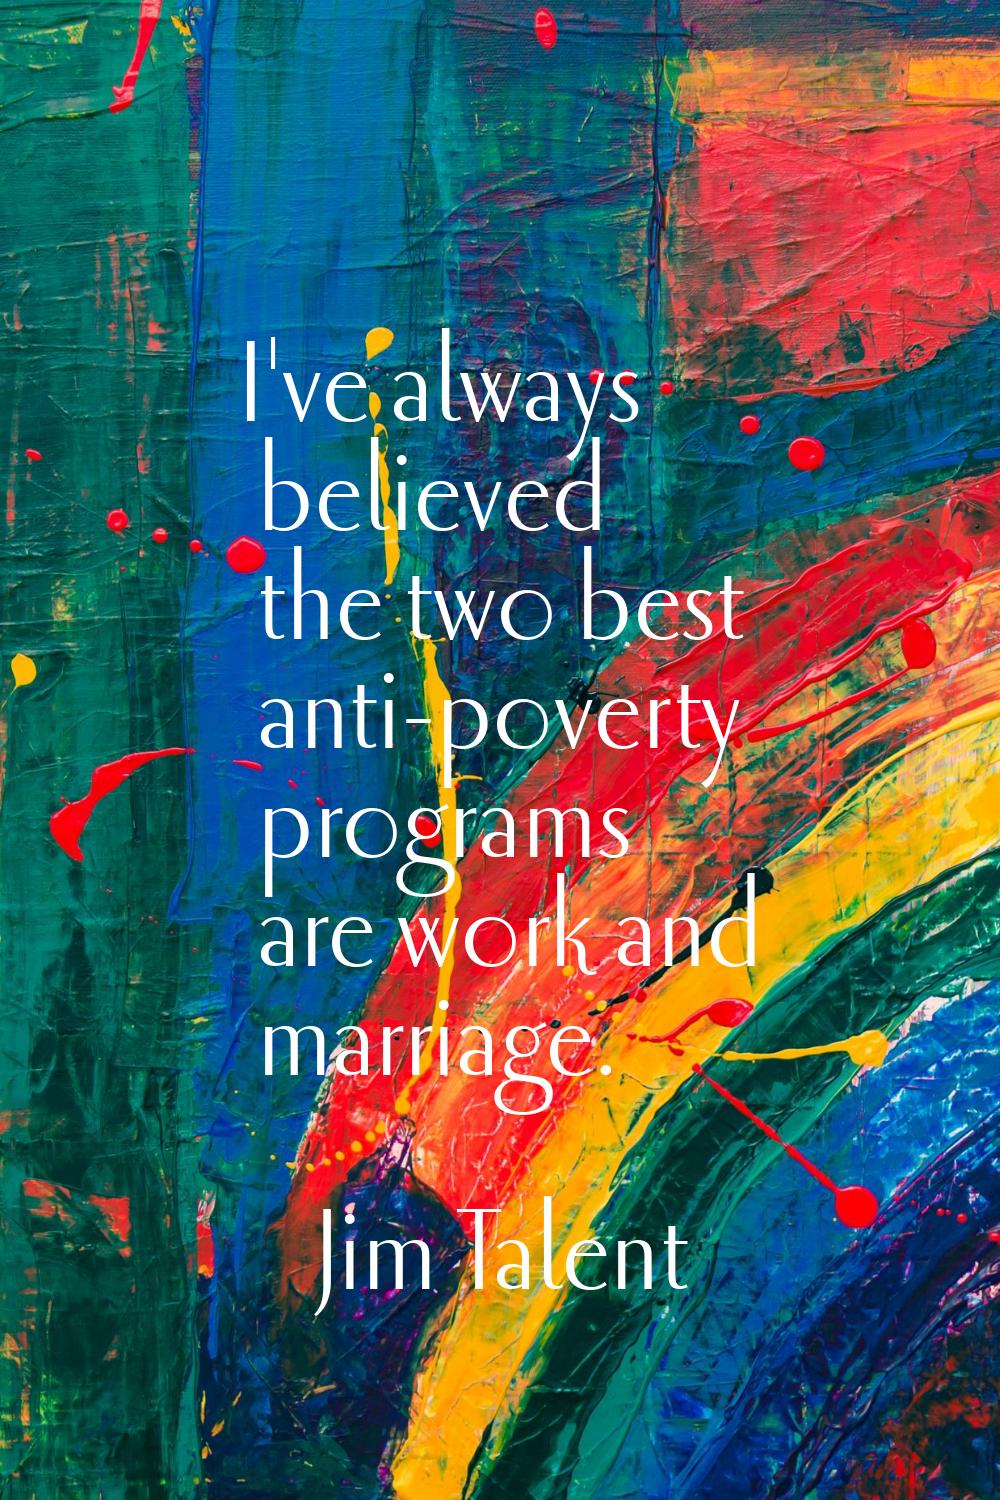 I've always believed the two best anti-poverty programs are work and marriage.